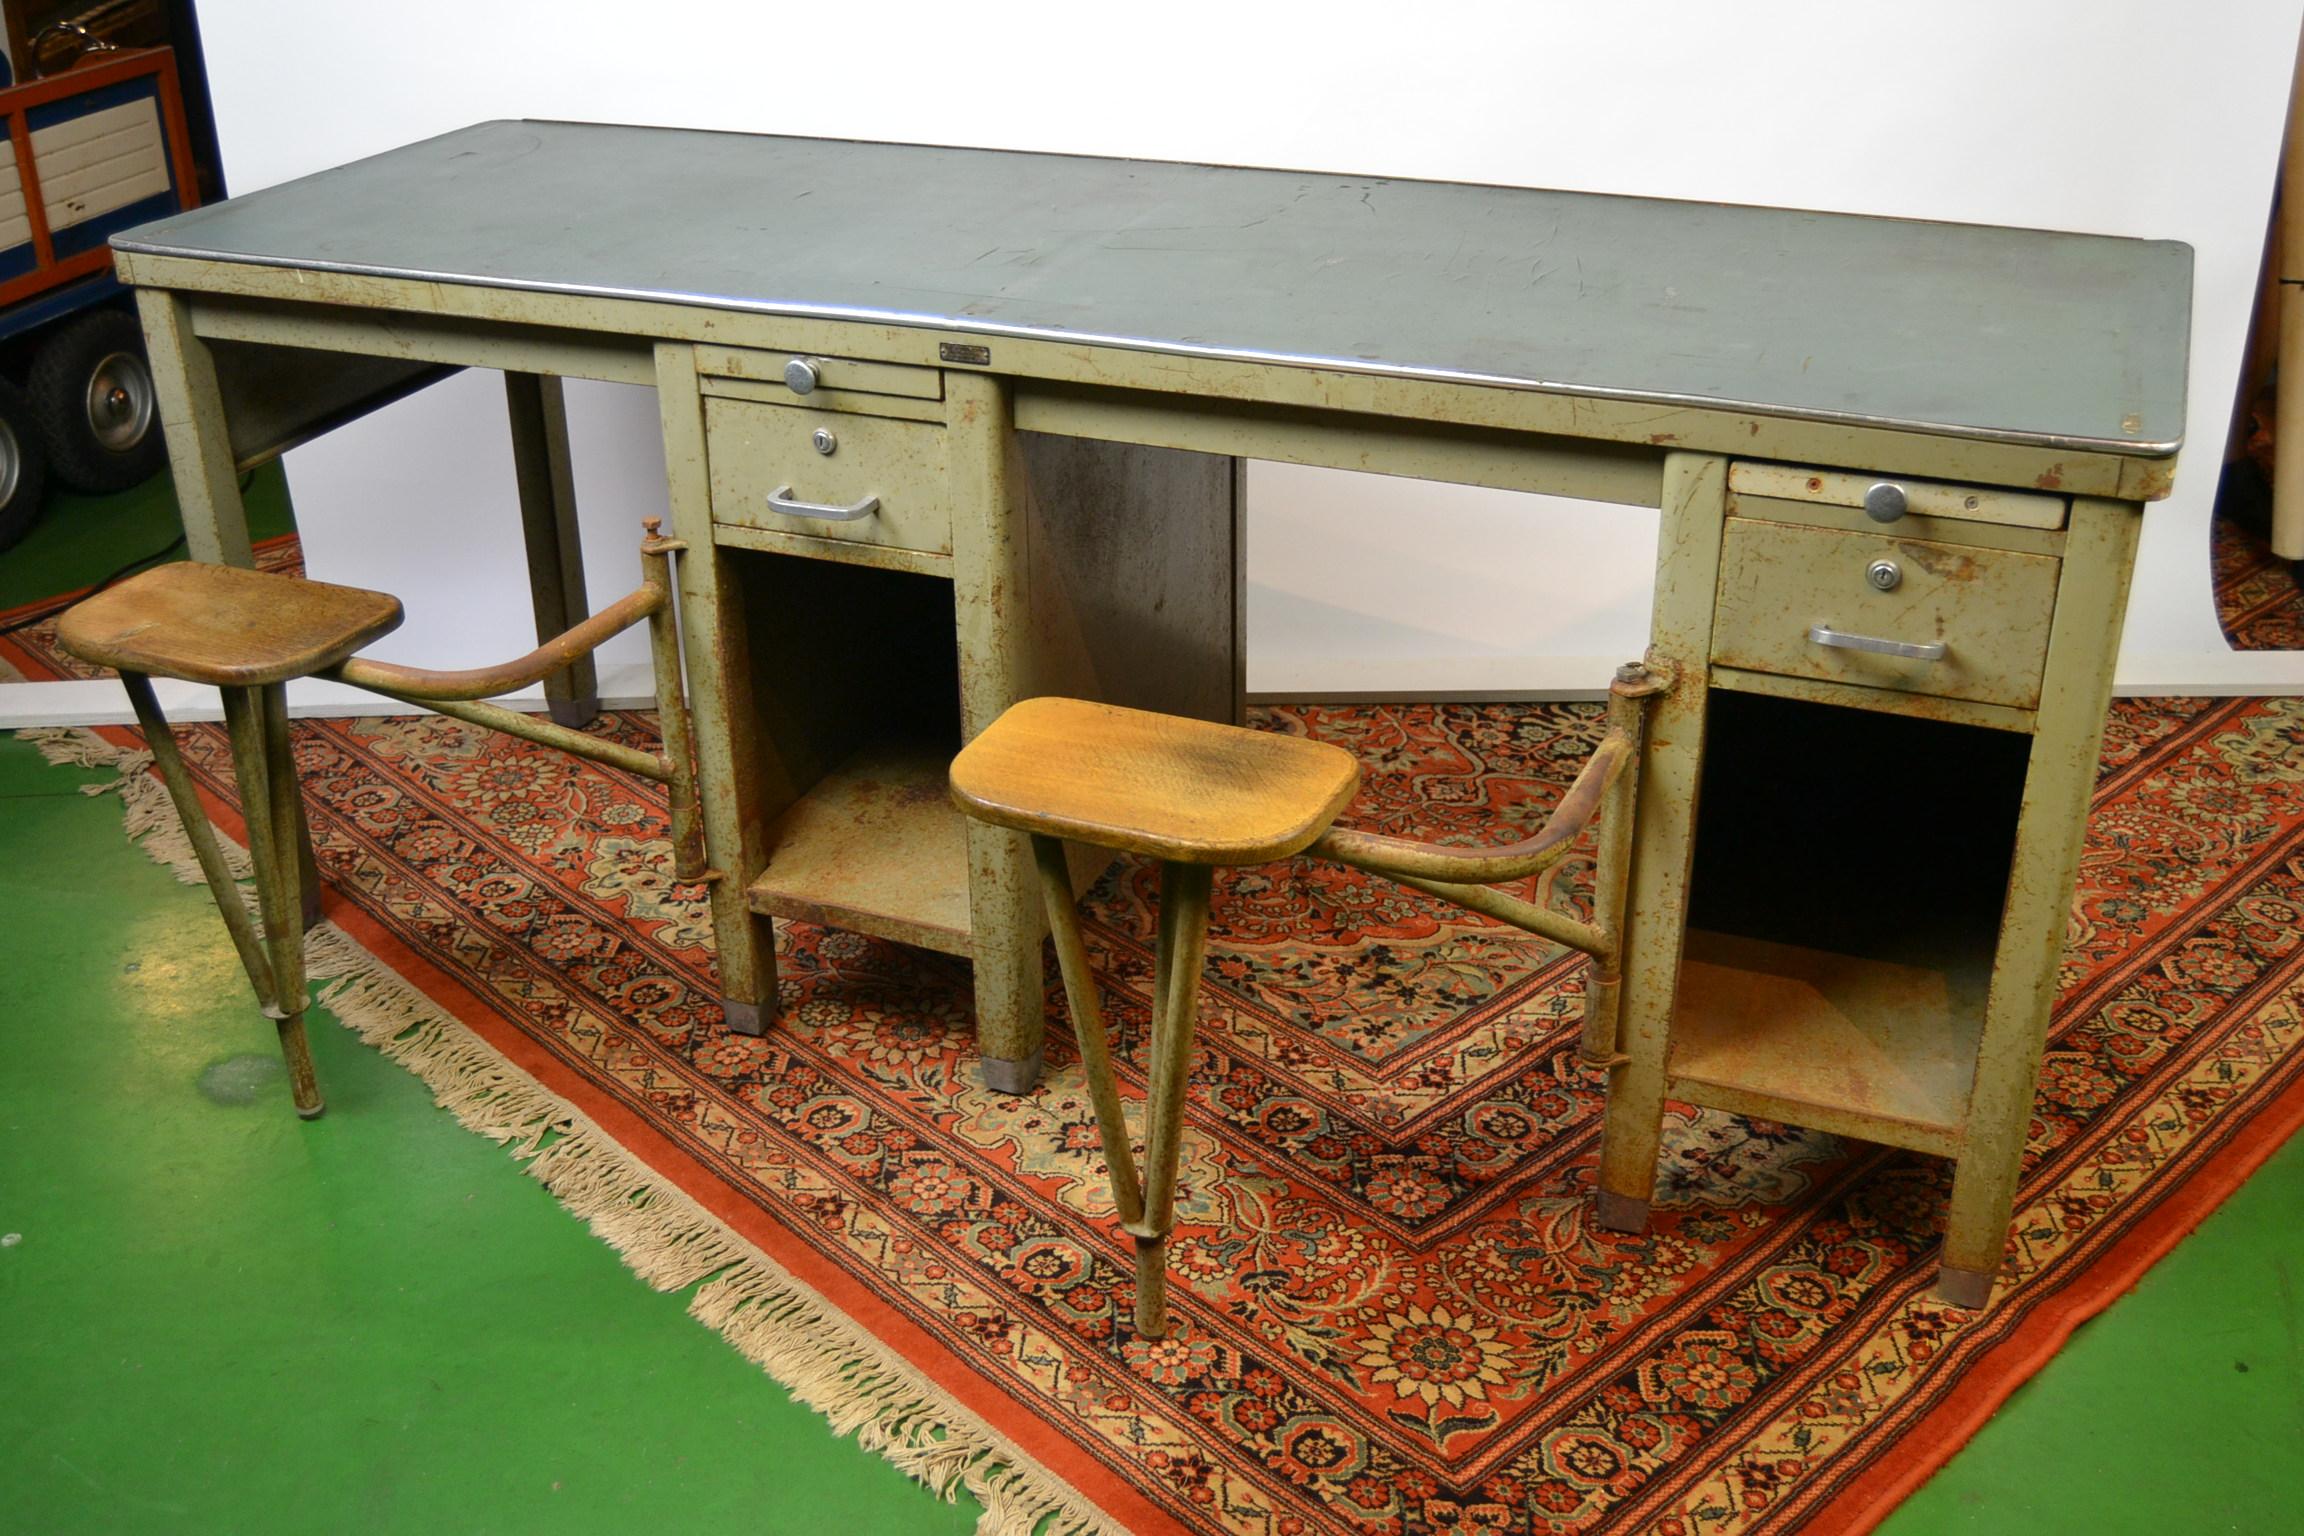 Industrial duo-seat workbench - desk table - work table - factory table
These metal tables with 2 collapsing chairs - swinging swivel stools / seats 
have also 2 drawers and 2 extending working space tablets. 
These were used in factories like